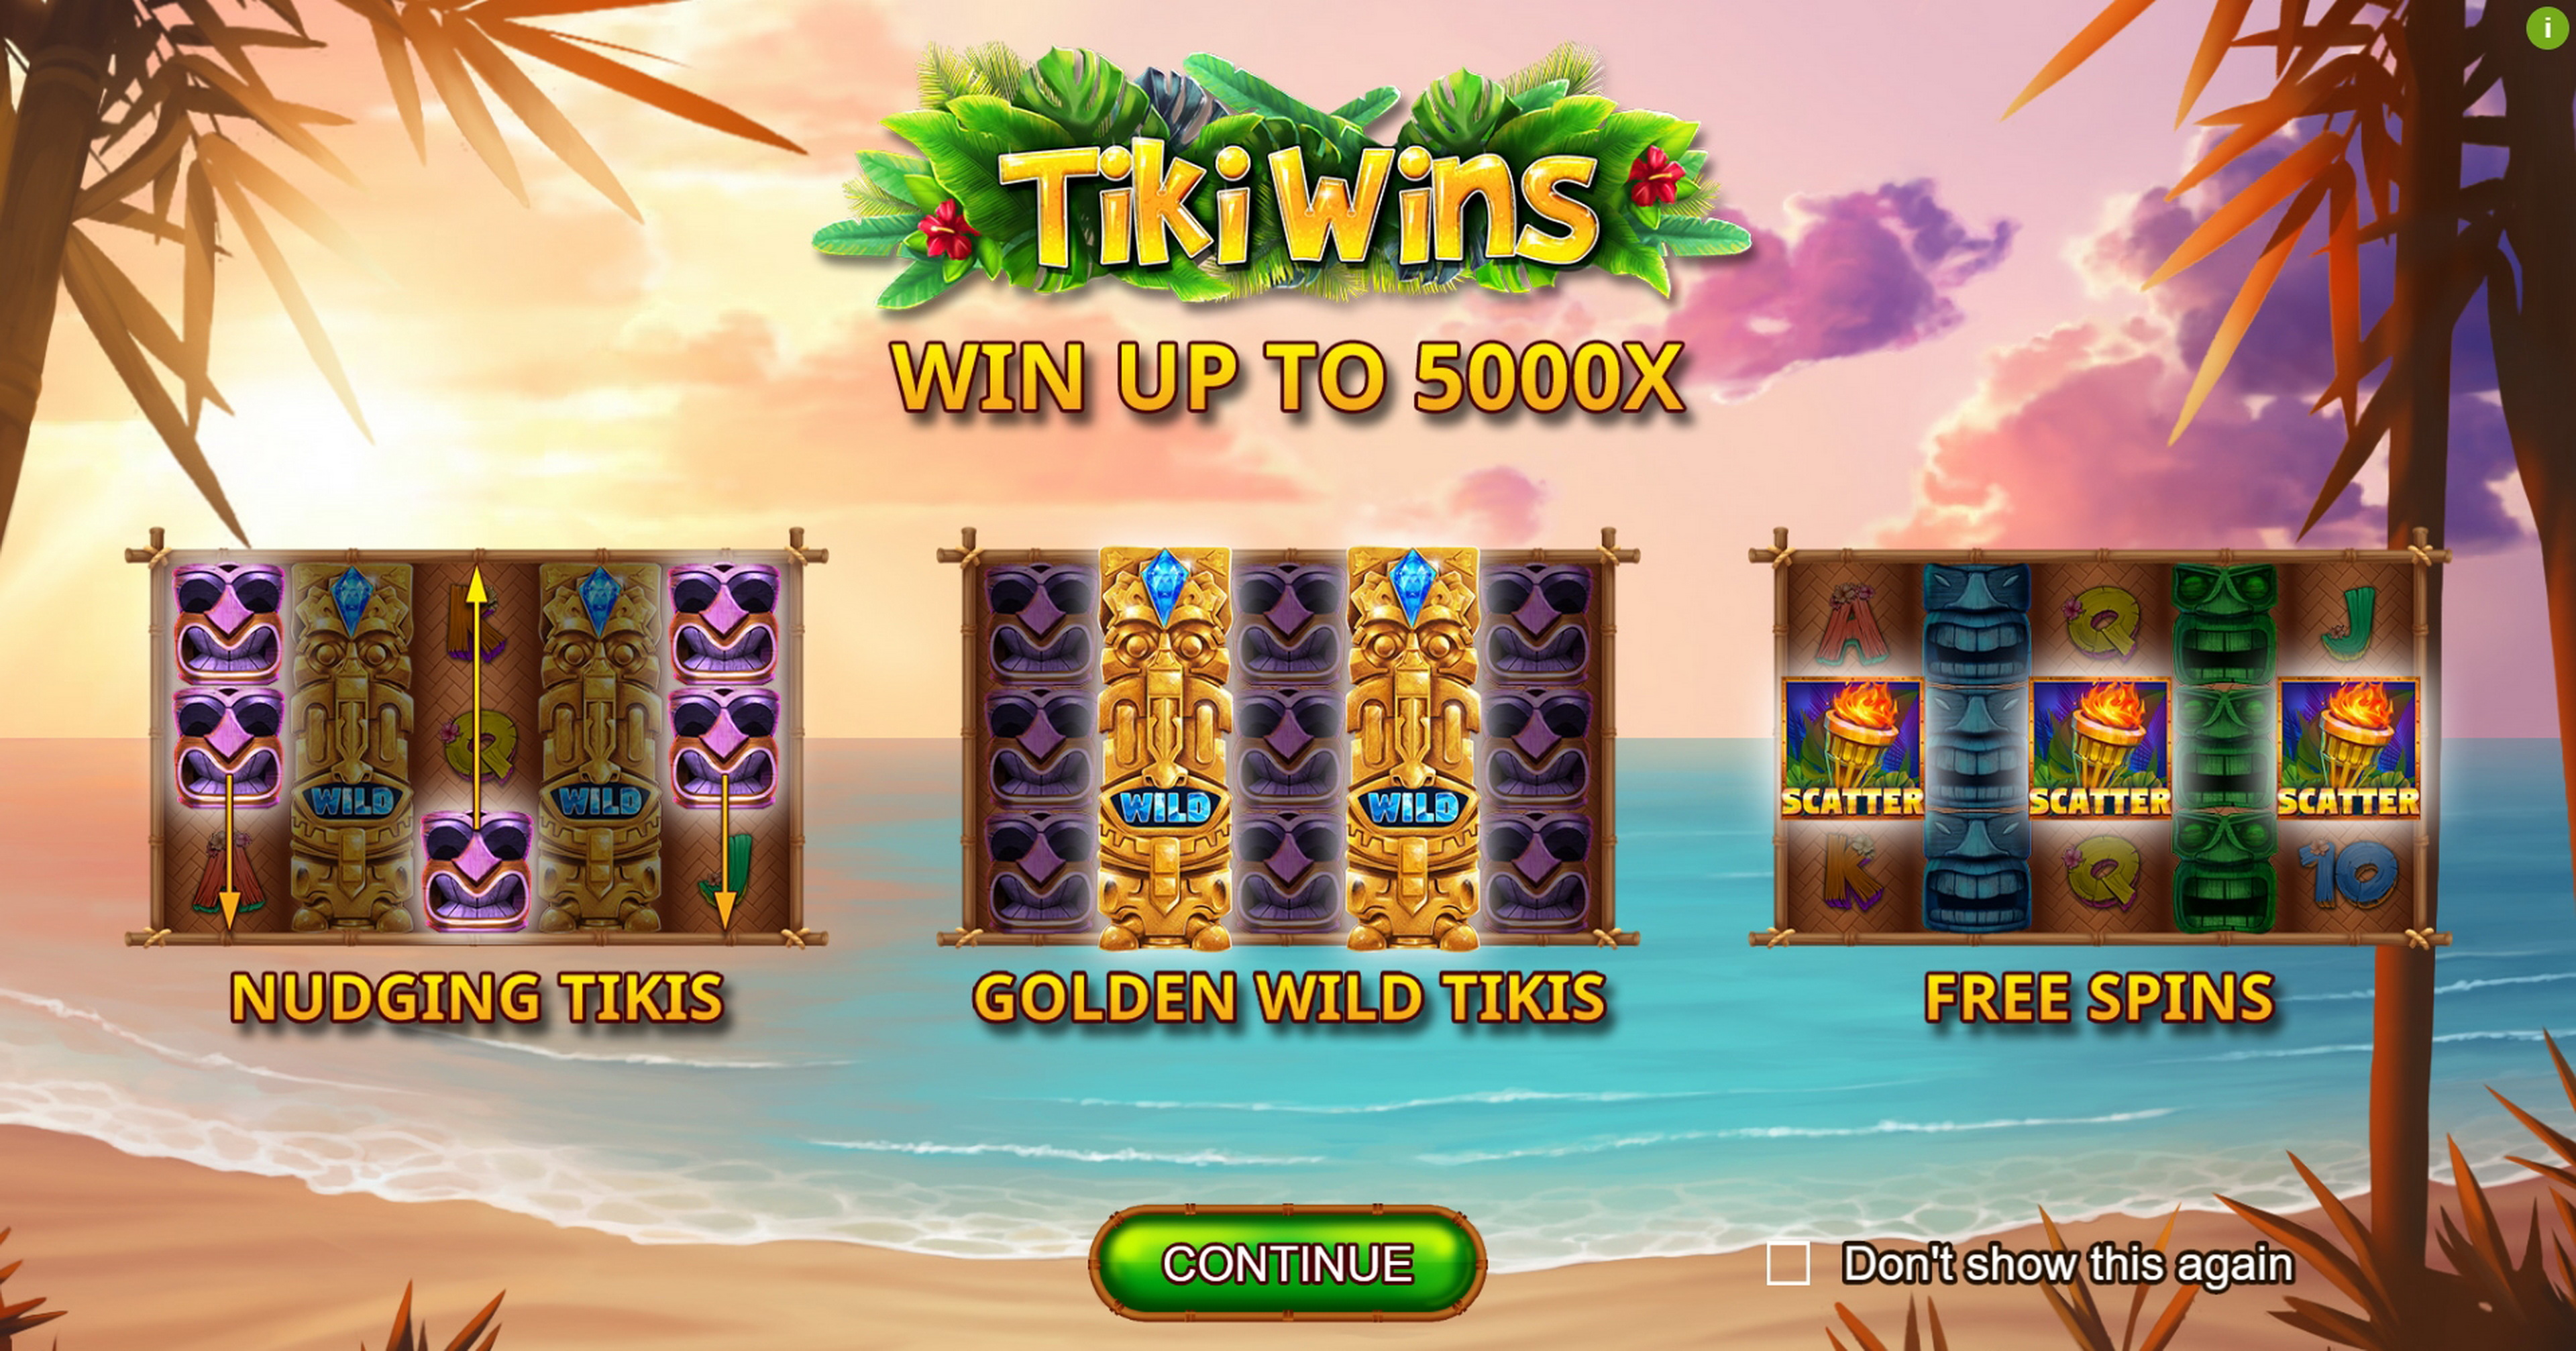 Play Tiki Wins Free Casino Slot Game by Booming Games